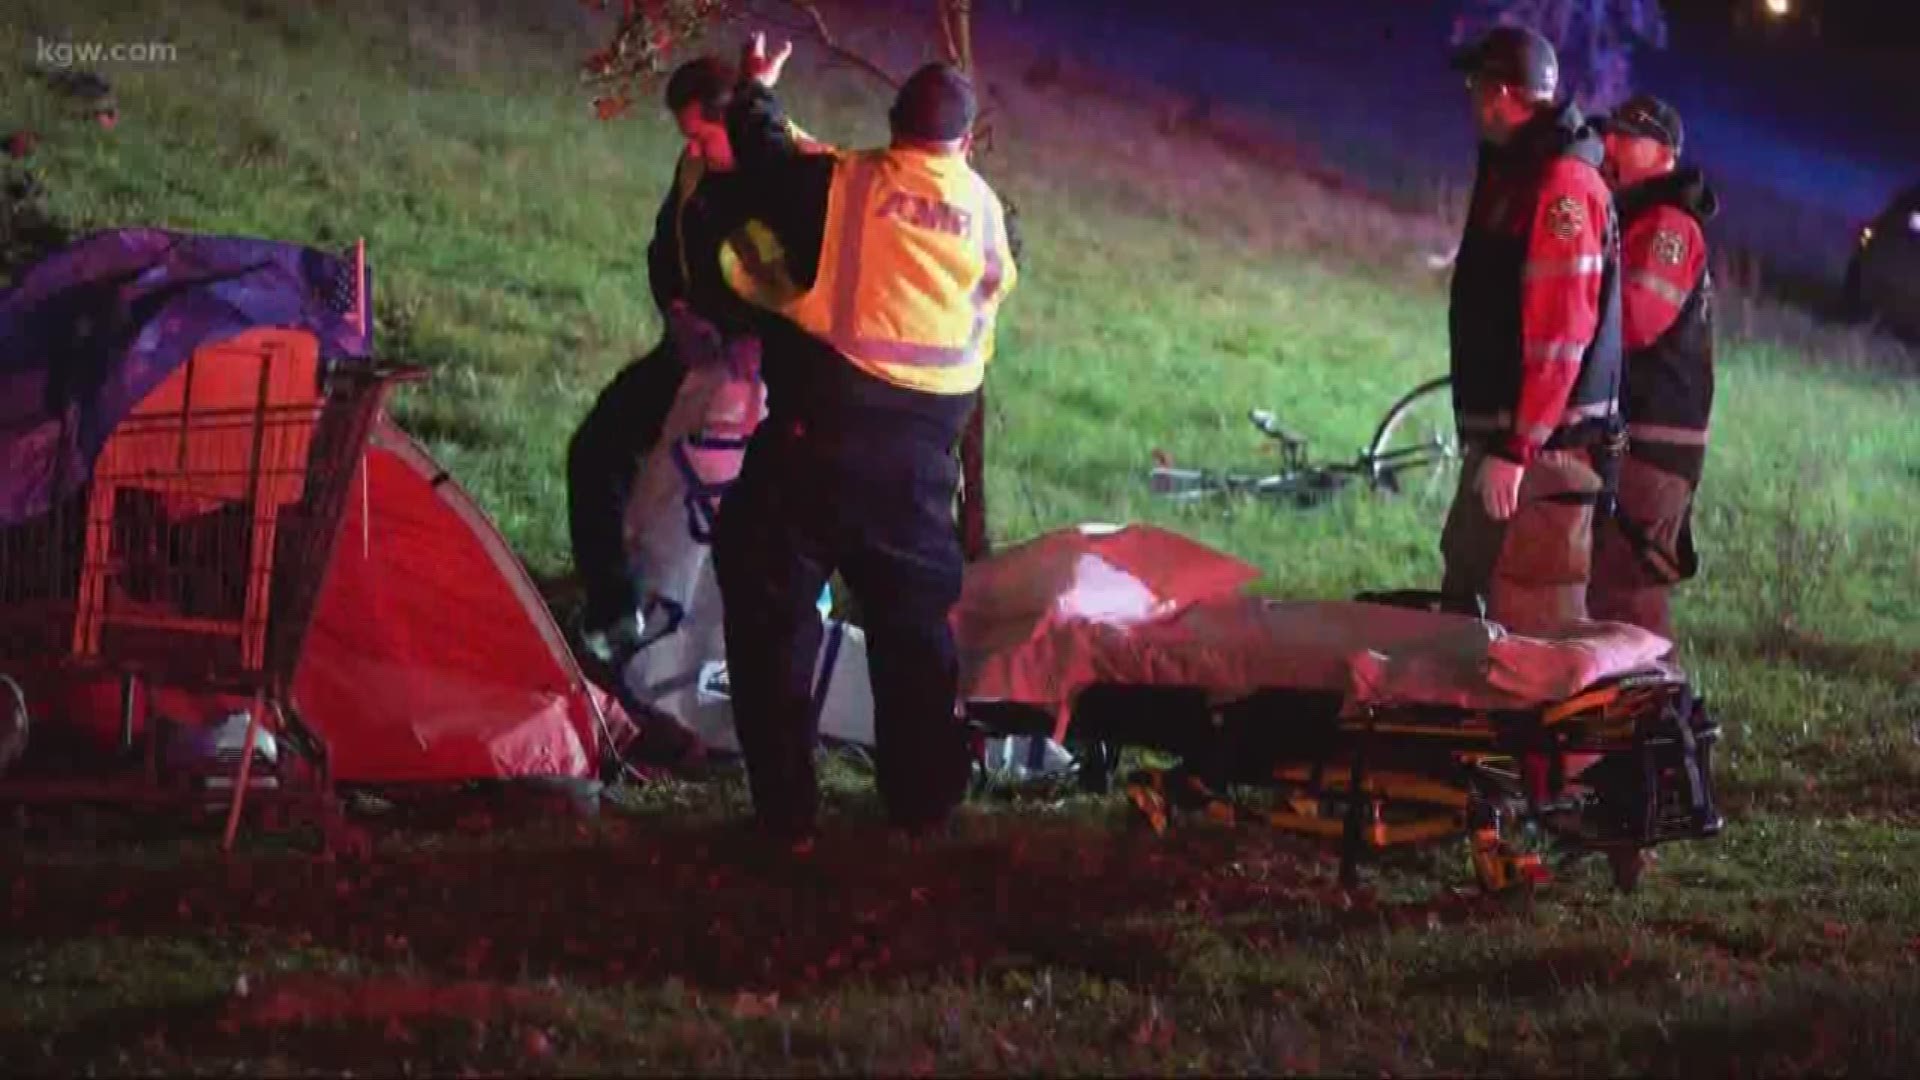 A woman sleeping in a tent had her legs crushed after she was hit by a driver in Portland Saturday morning. Two other people in the tent were not hurt.